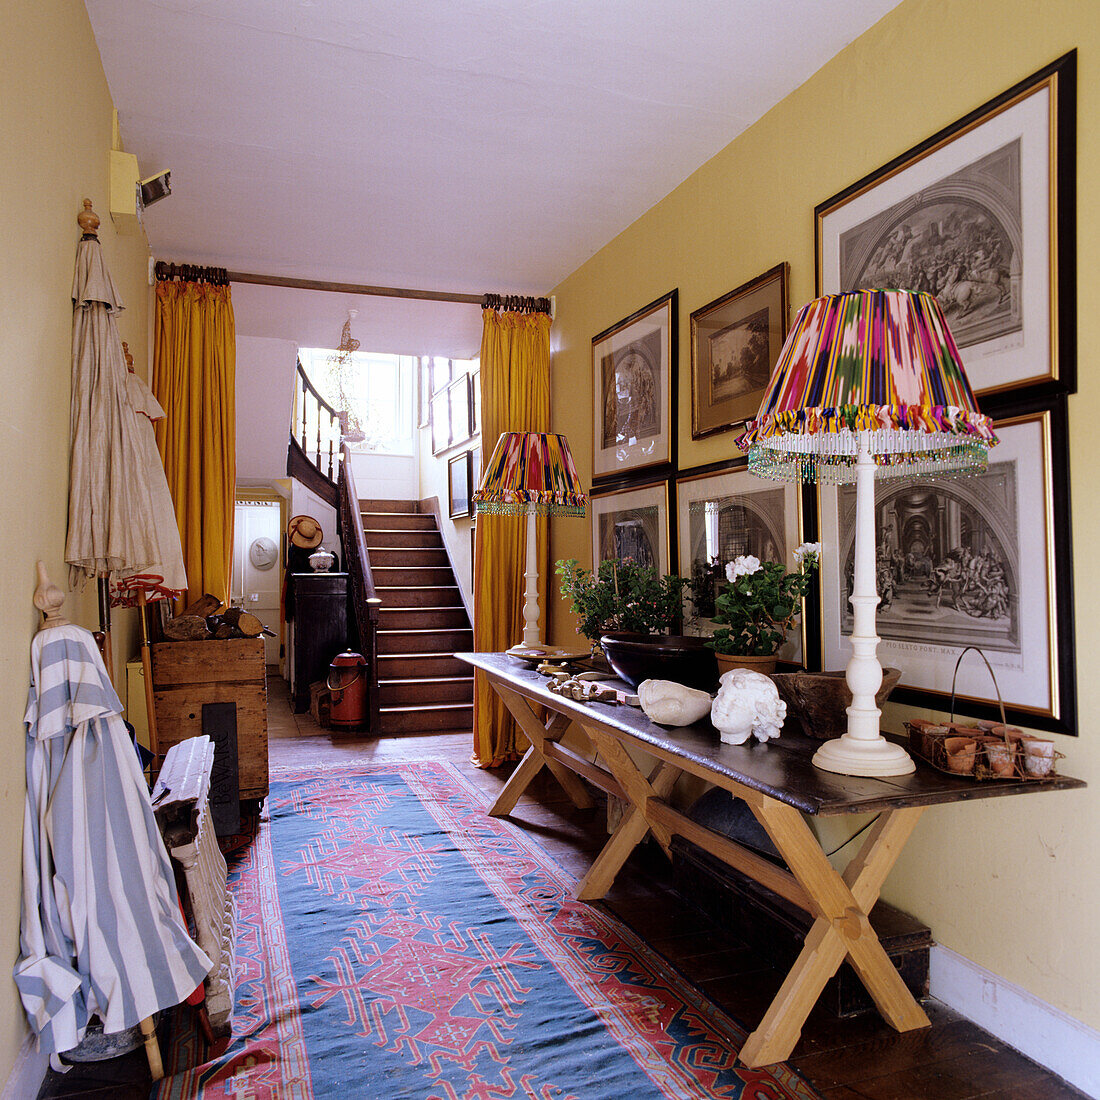 Hallway with color pattern carpet, wooden table and vintage lampshades